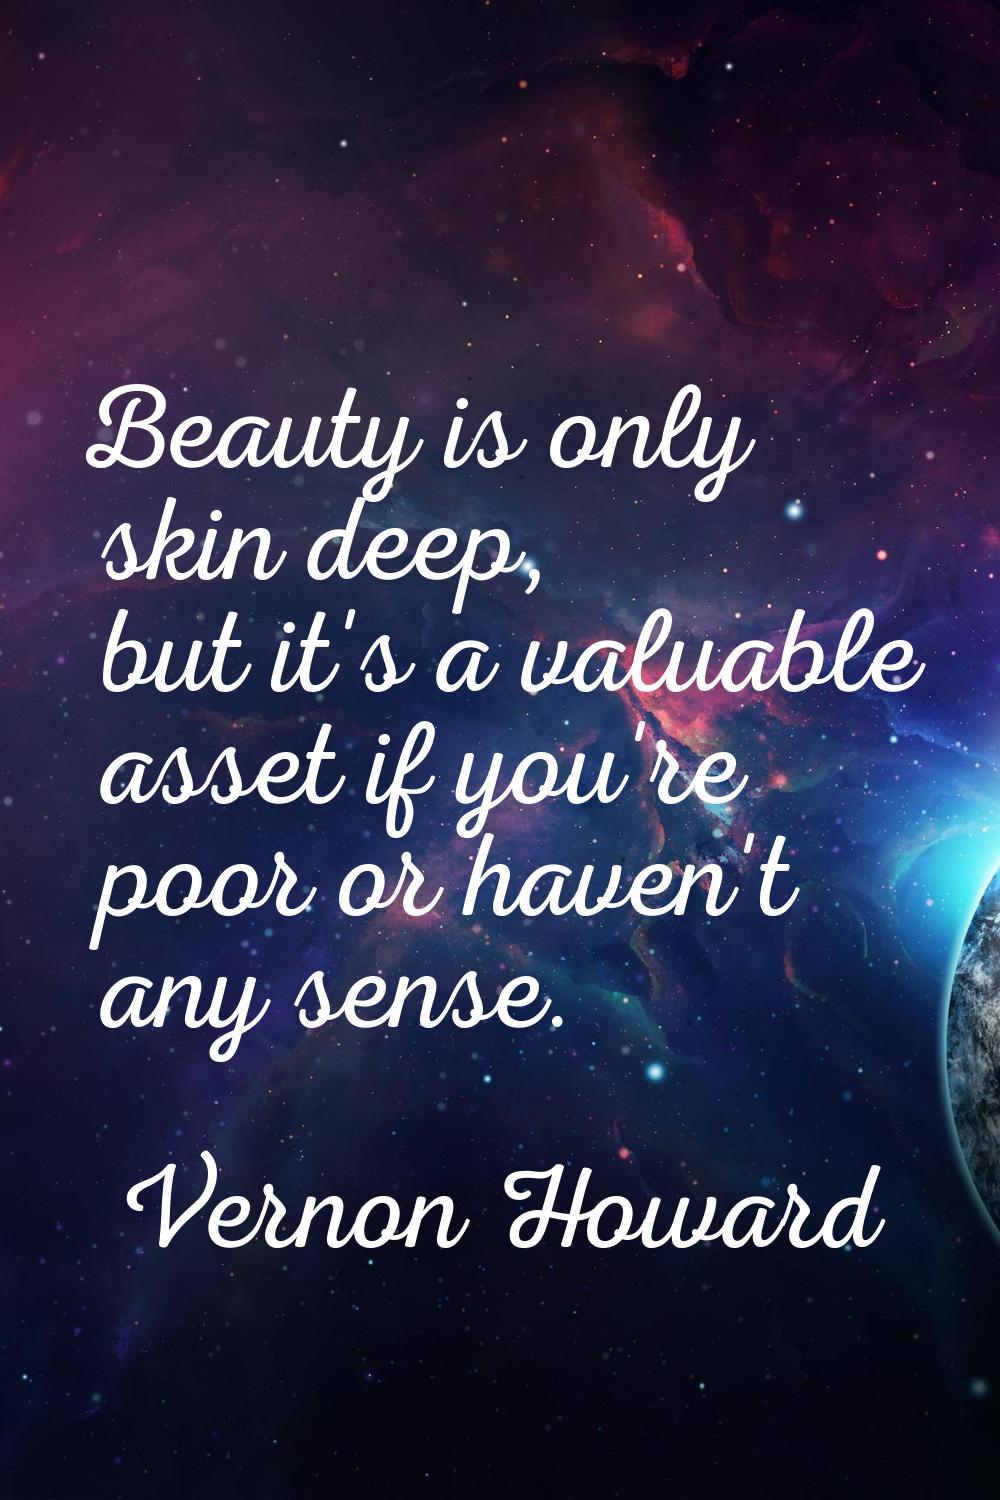 Beauty is only skin deep, but it's a valuable asset if you're poor or haven't any sense.